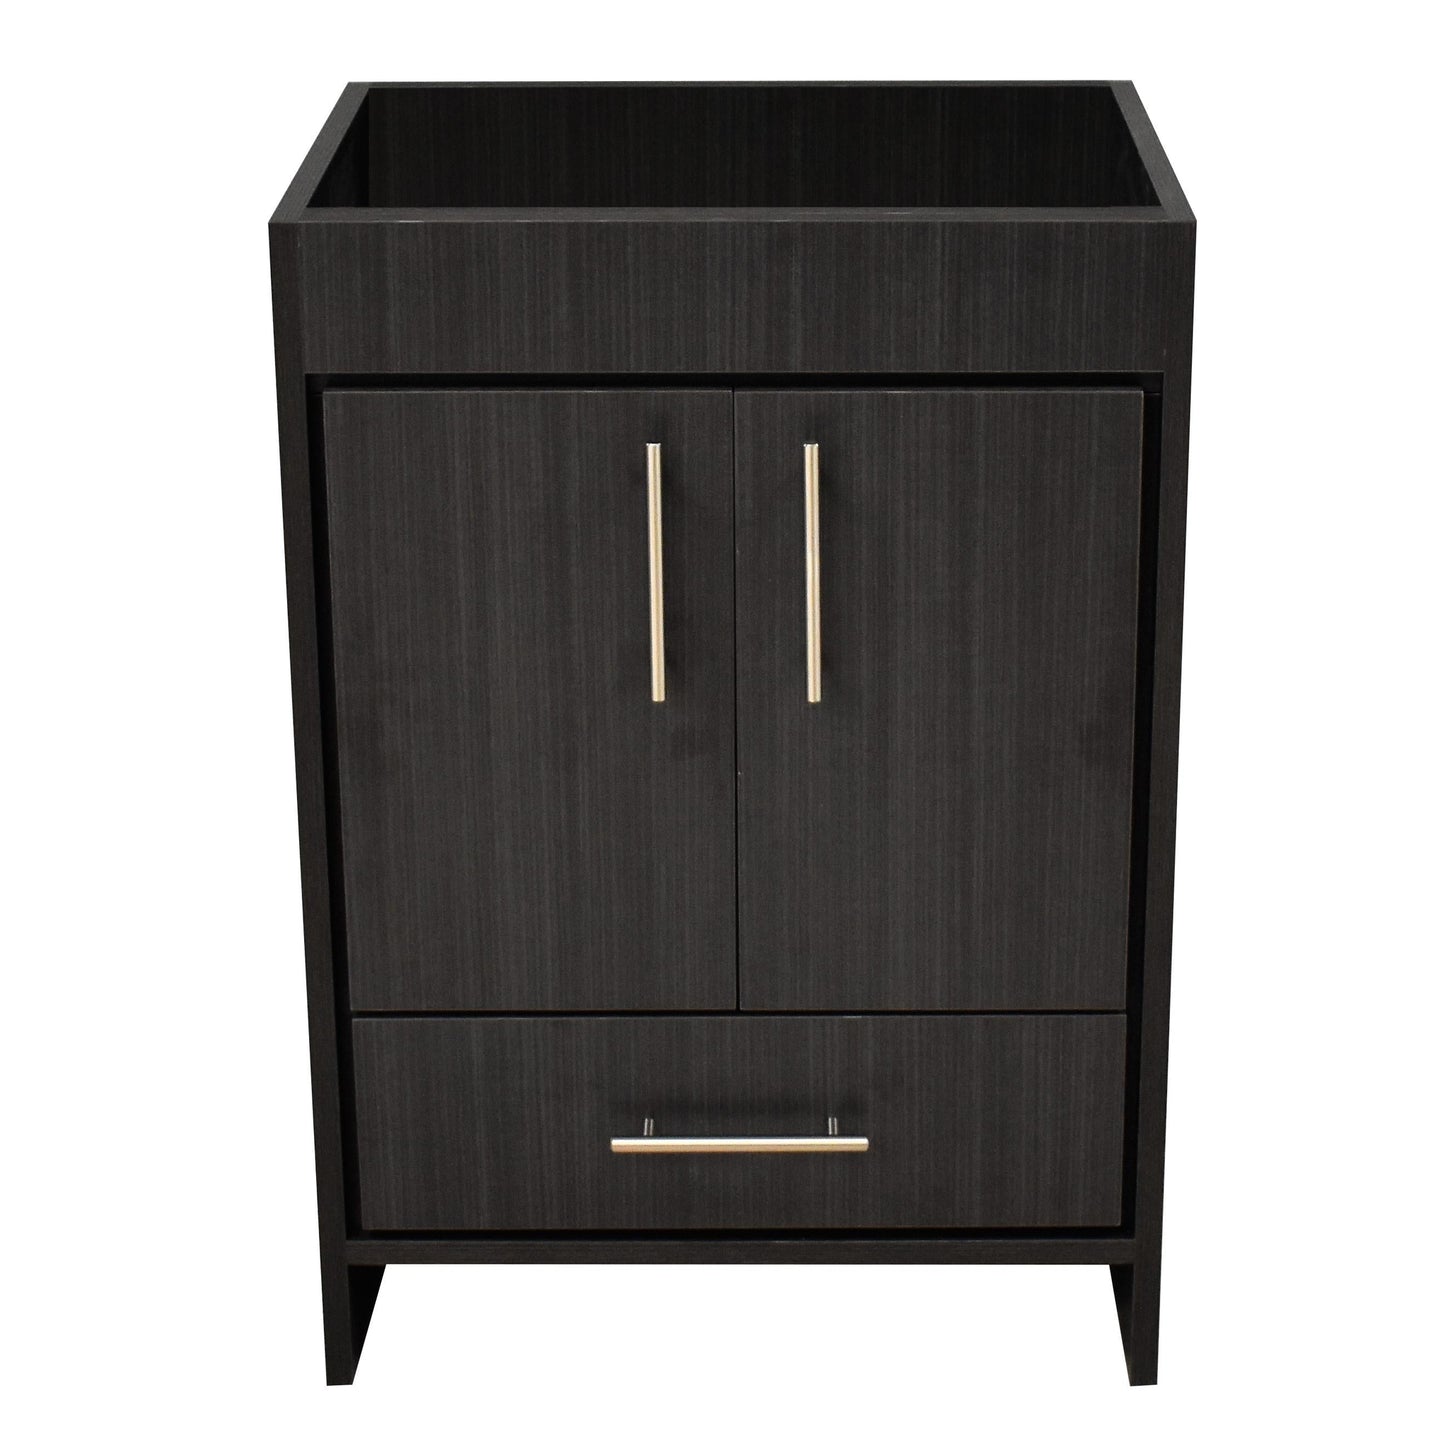 Volpa USA Pacific 24" Black Ash Freestanding Modern Bathroom Vanity With Brushed Nickel Round Handles Cabinet Only